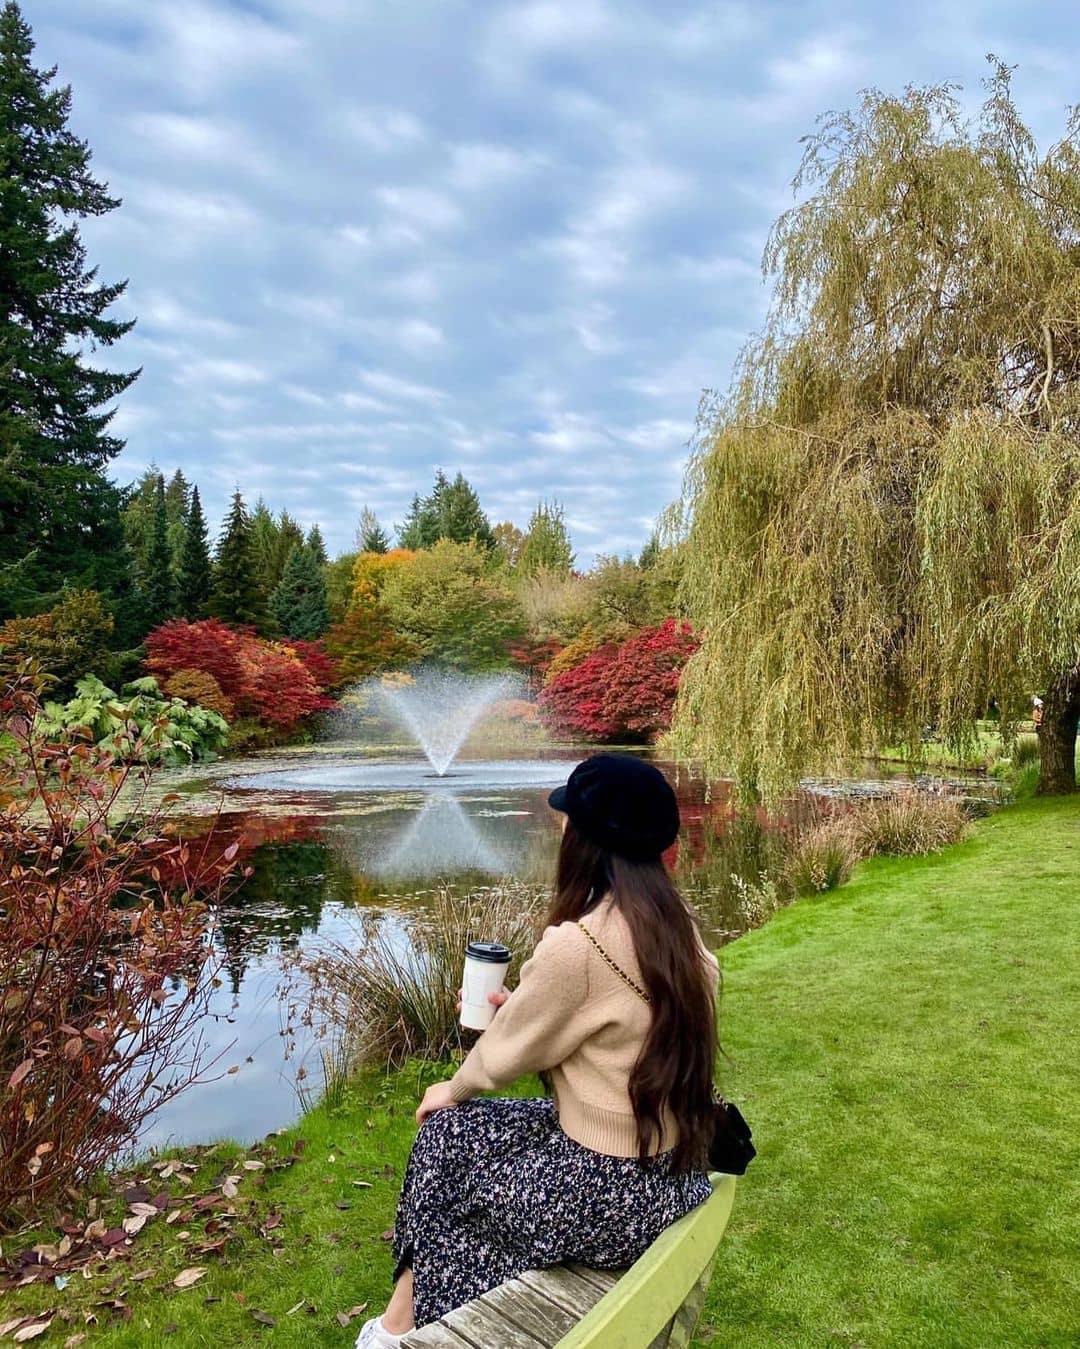 best parks - van dusen gardens with girl sitting on bench looking at water fountain